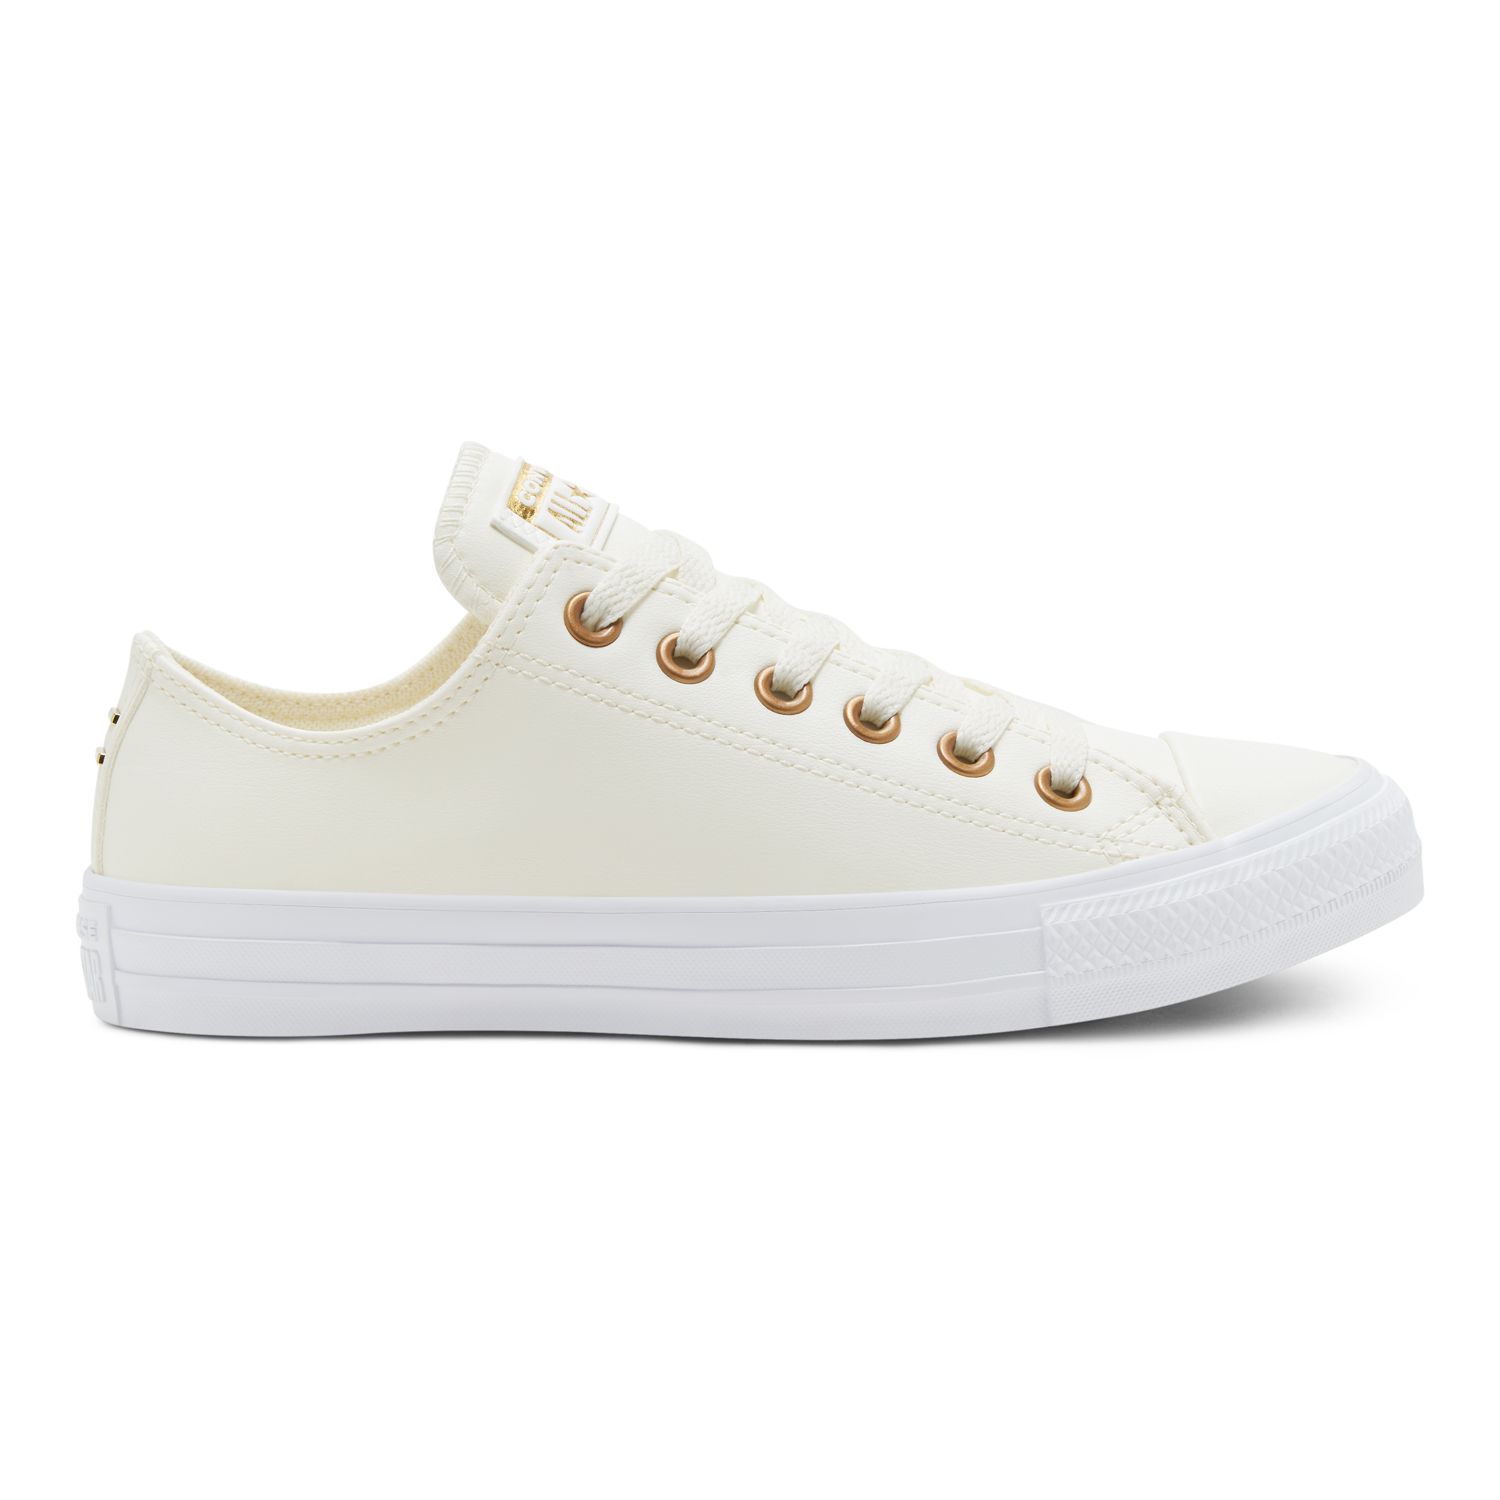 converse gold and white